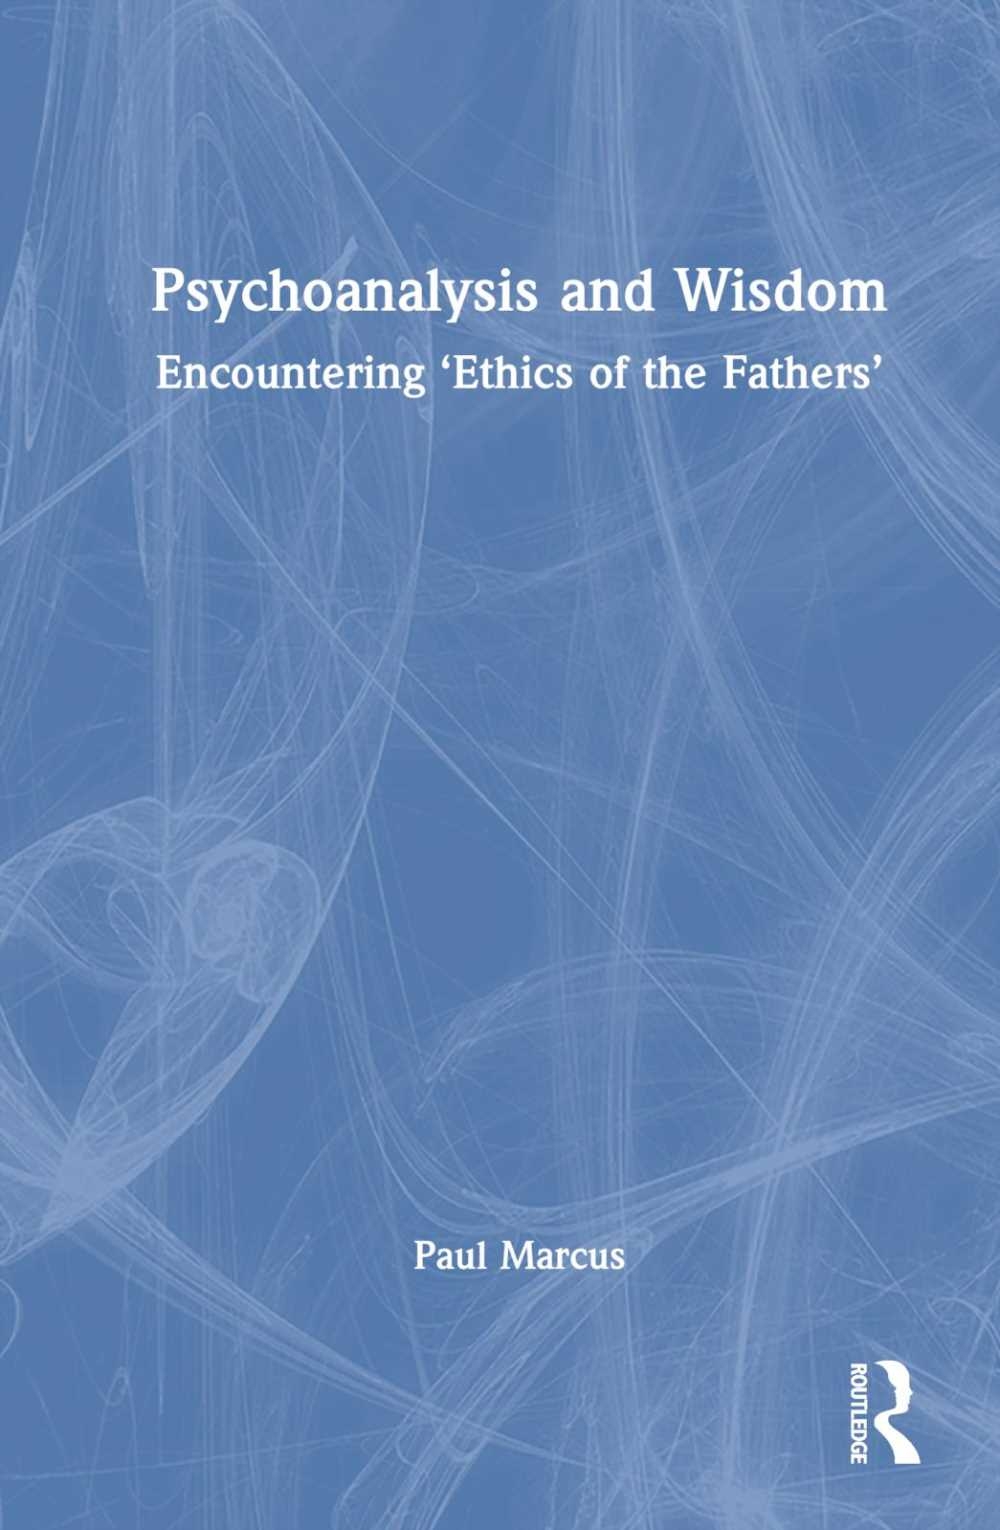 Psychoanalysis and Wisdom: Encountering ’Ethics of the Fathers’